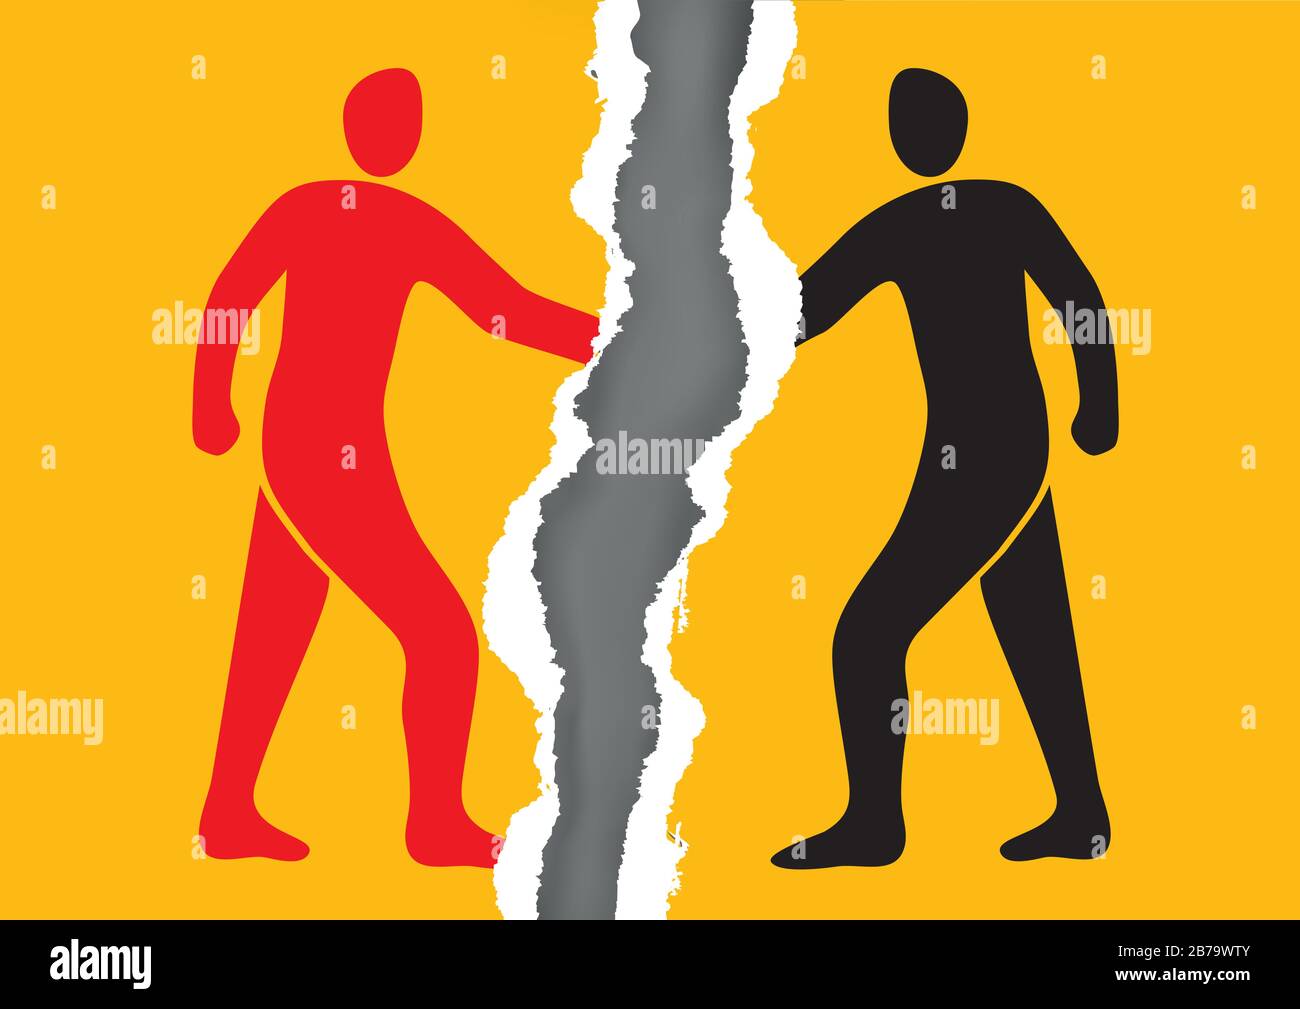 No Handshake,risk of Corona virus transmission. Torn yellow paper with two male silhouettes hand shaking at a meeting. Vector available. Stock Vector